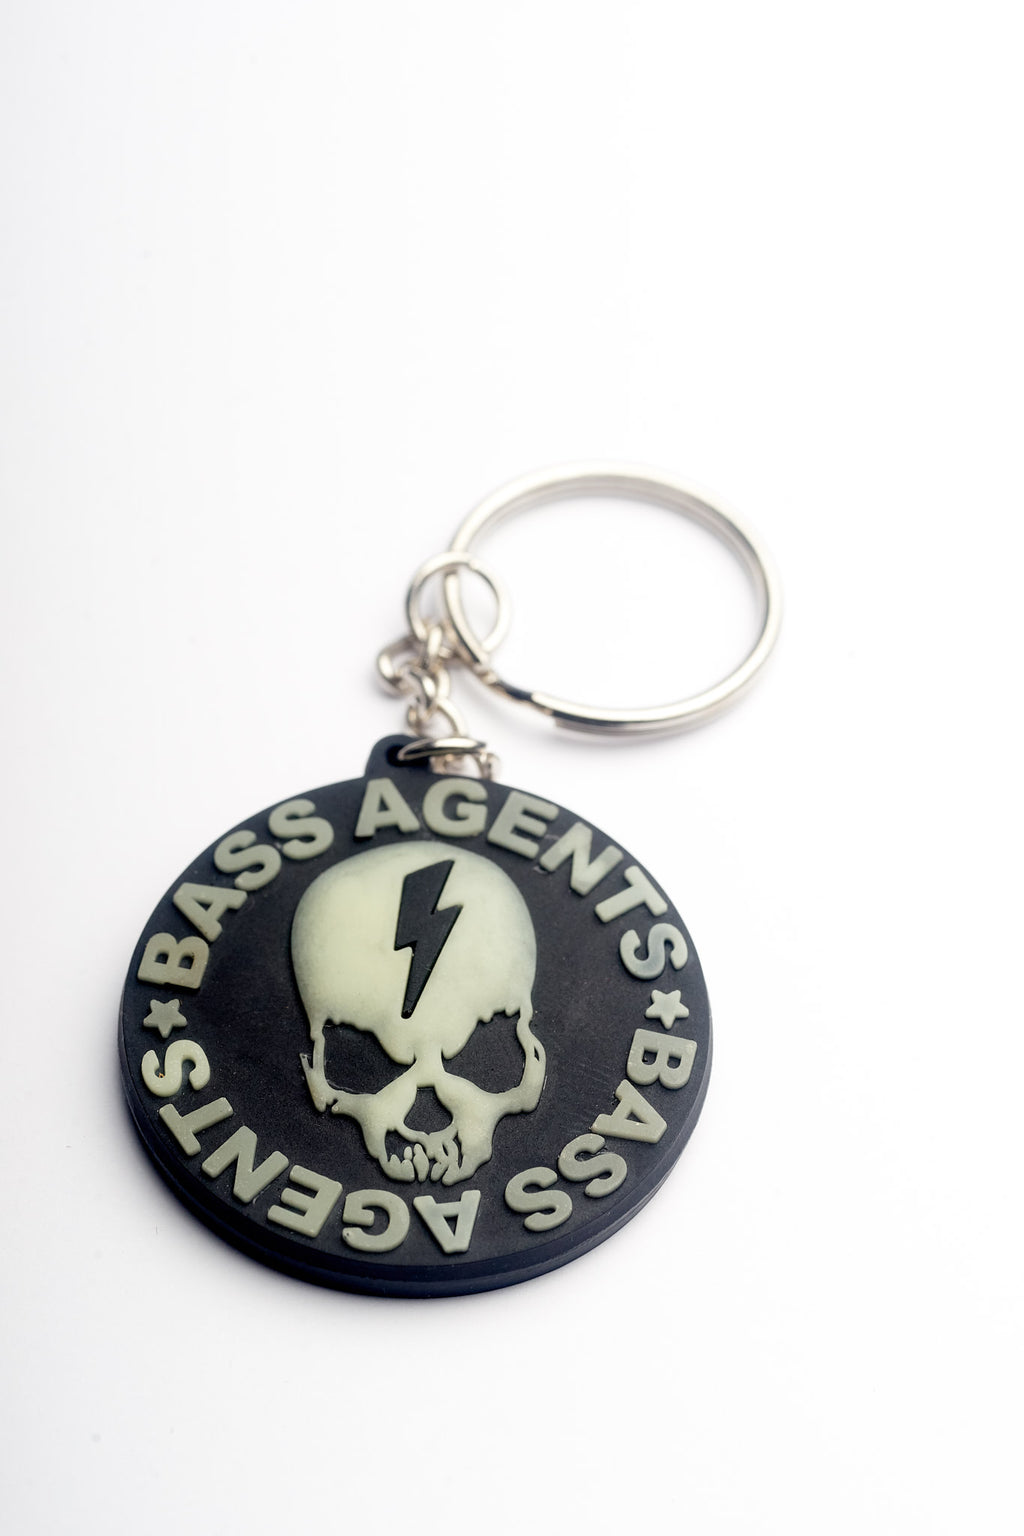 Bass Agents Keyring - SuperFried